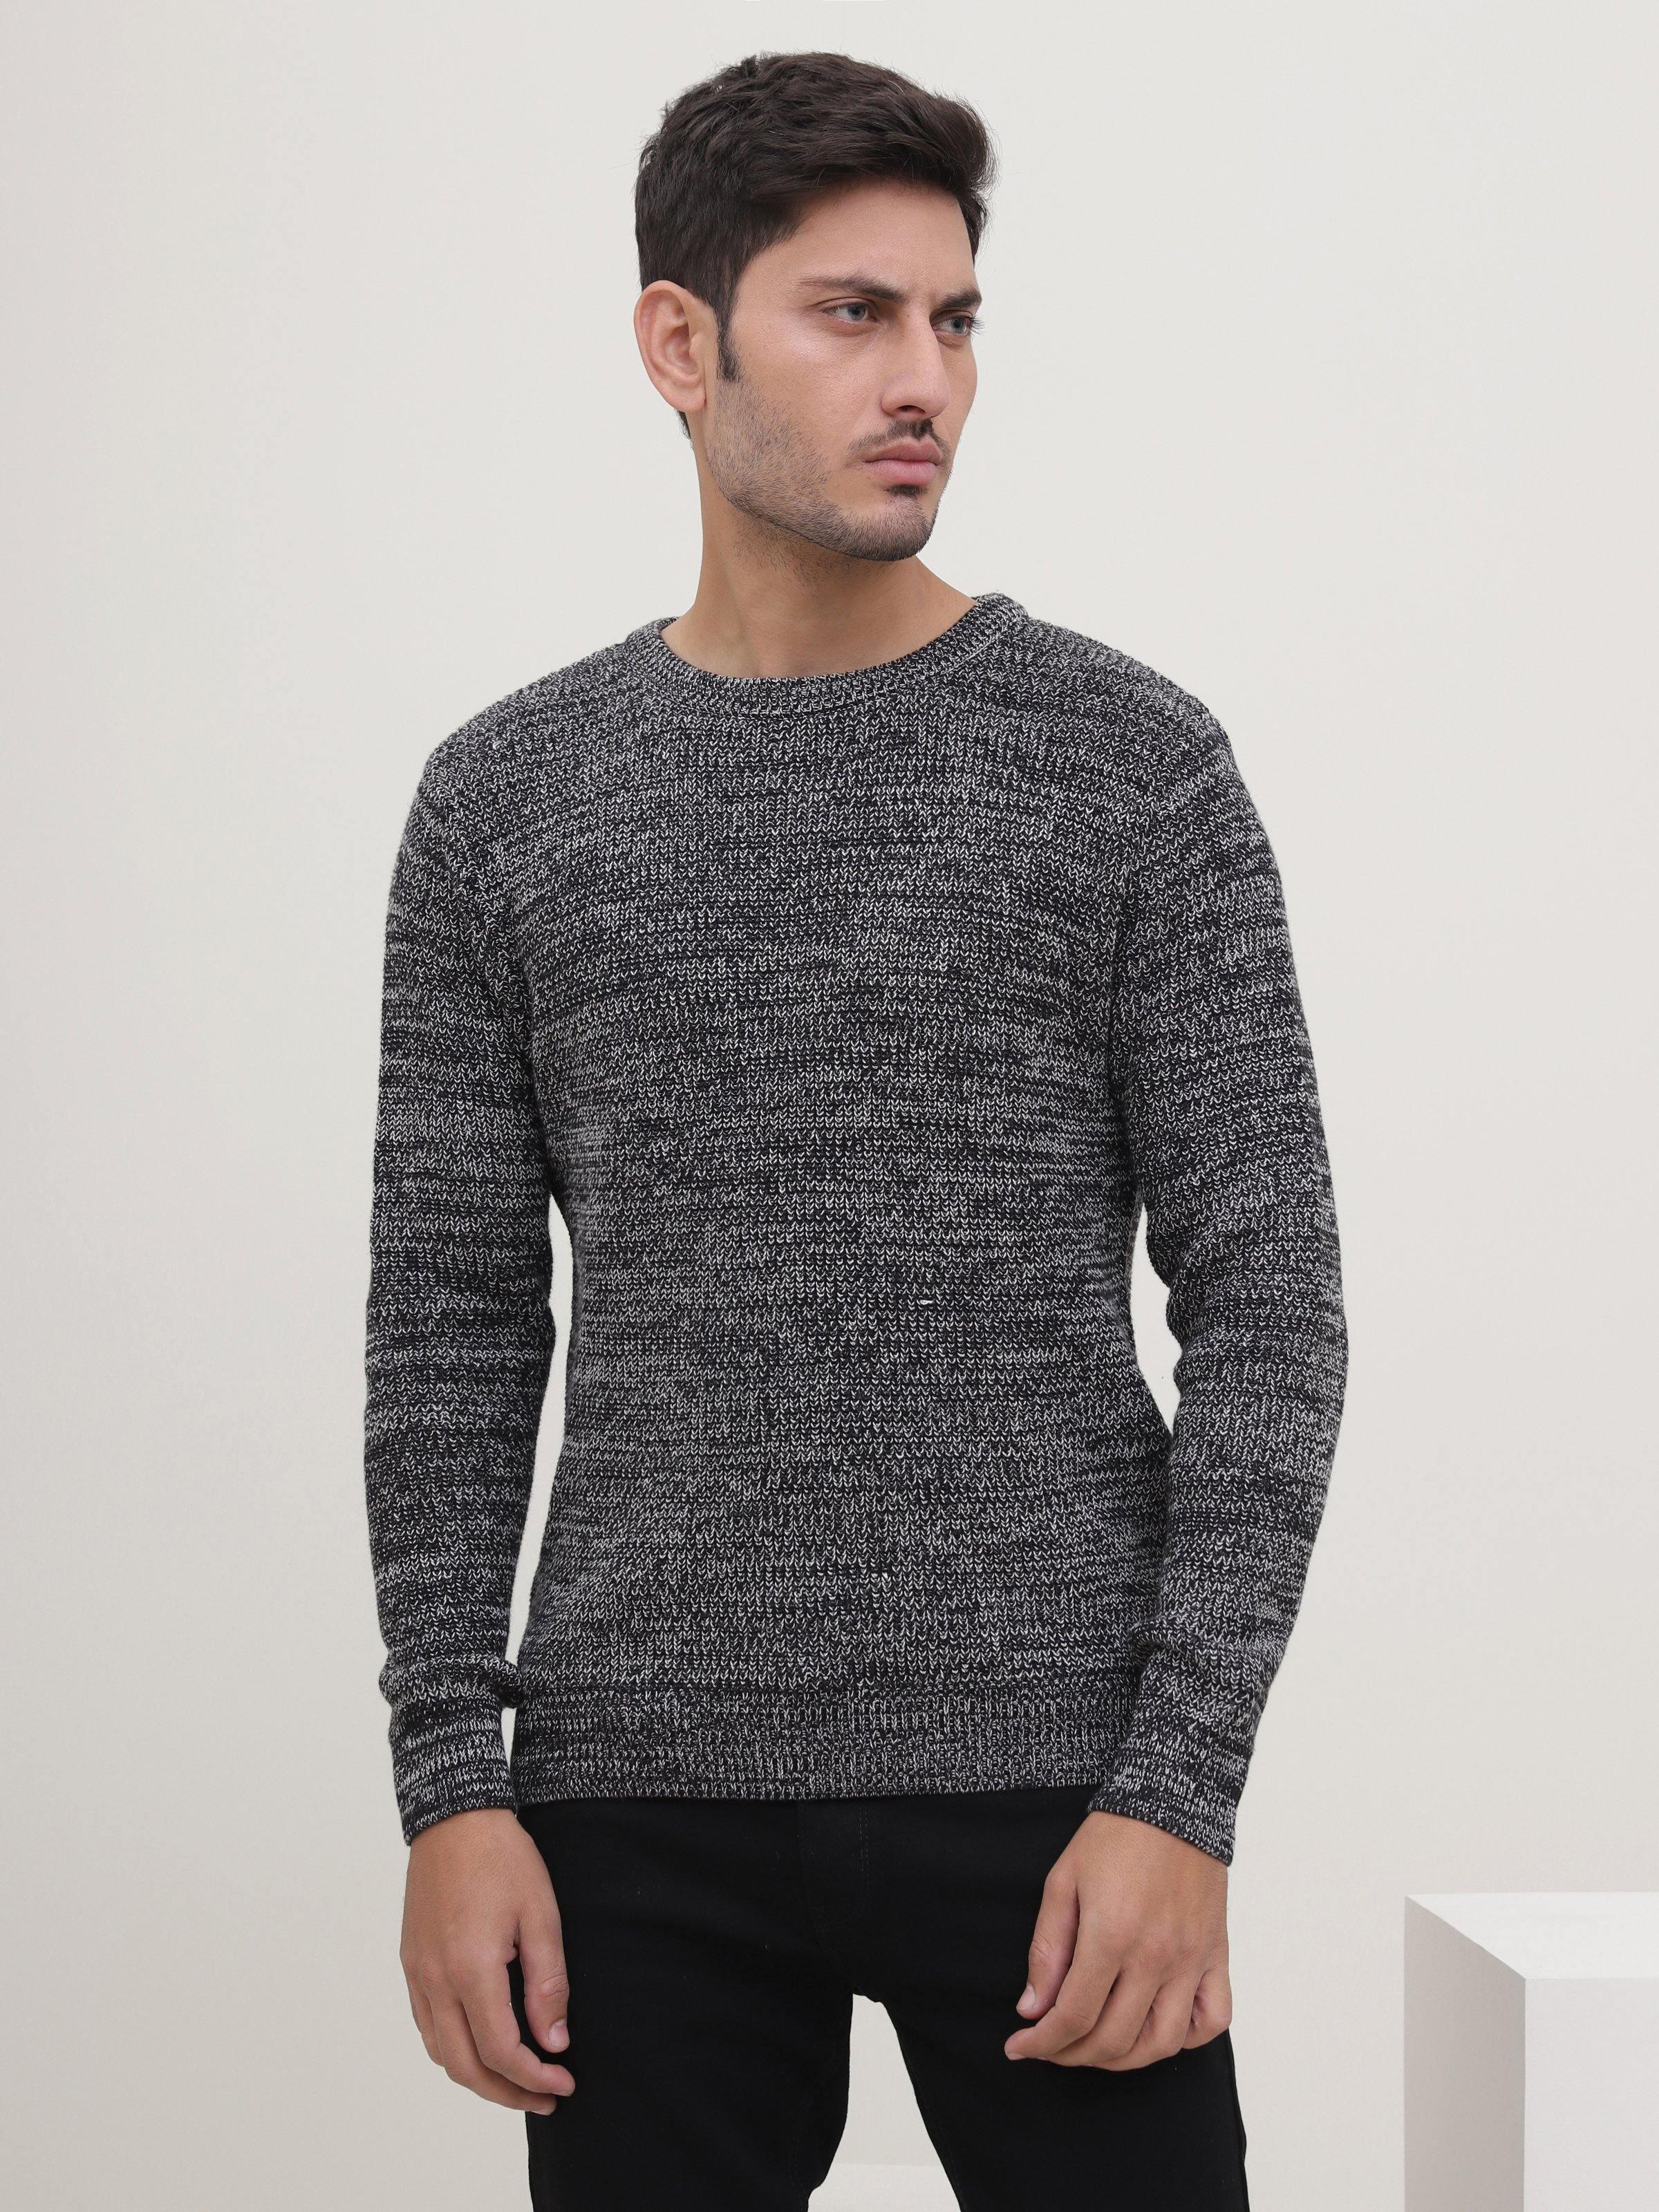 SWEATER CREW NECK FULL SLEEVE BLACK WHITE at Charcoal Clothing